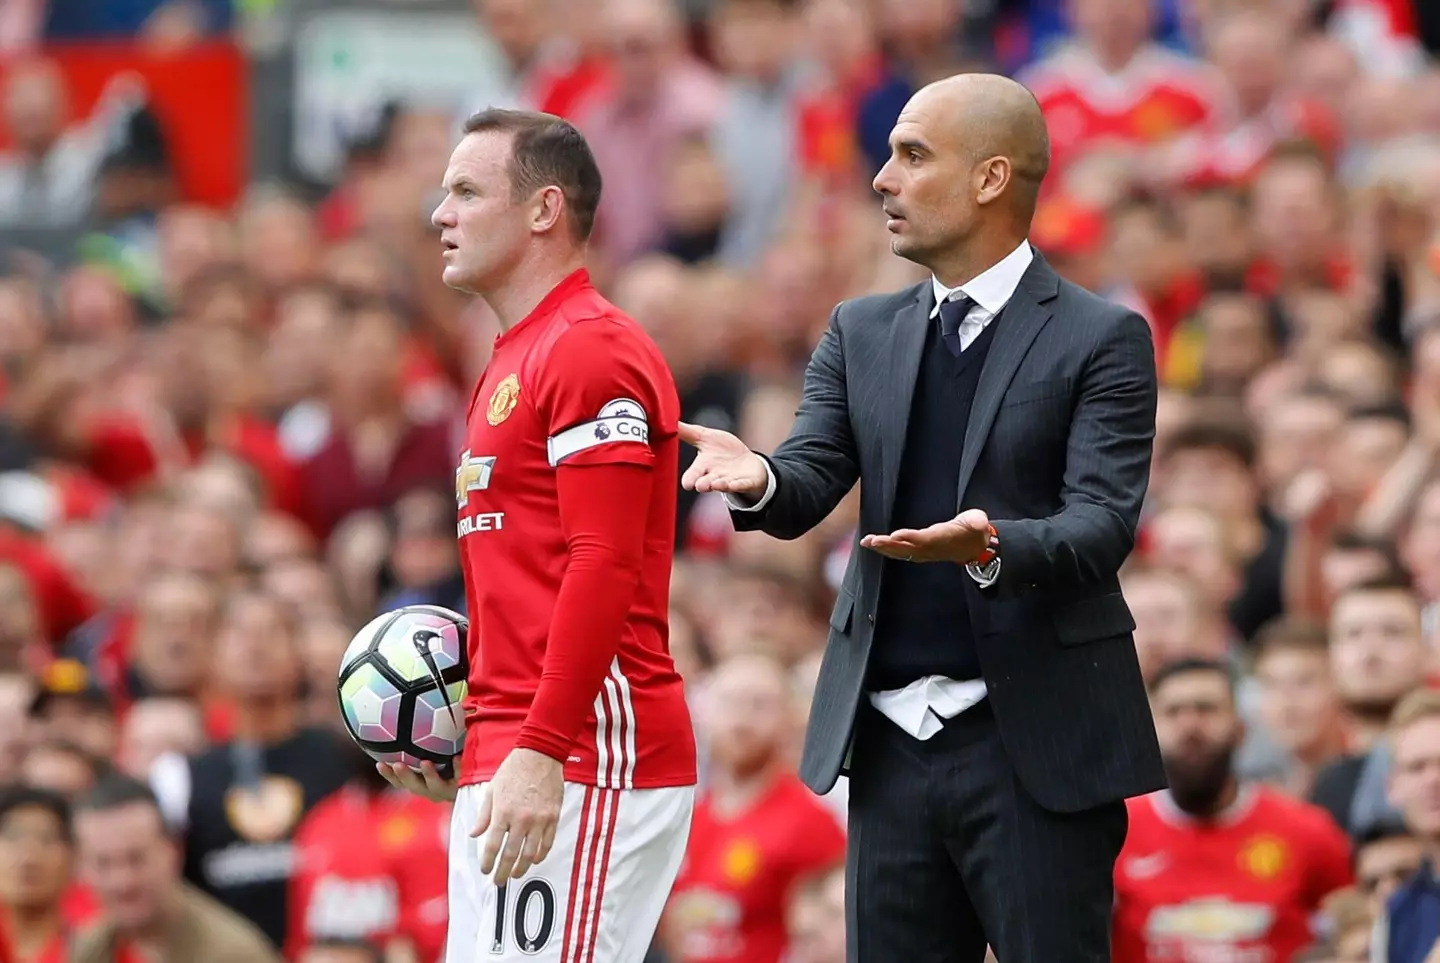 Rooney and Guardiola during the game. (Image